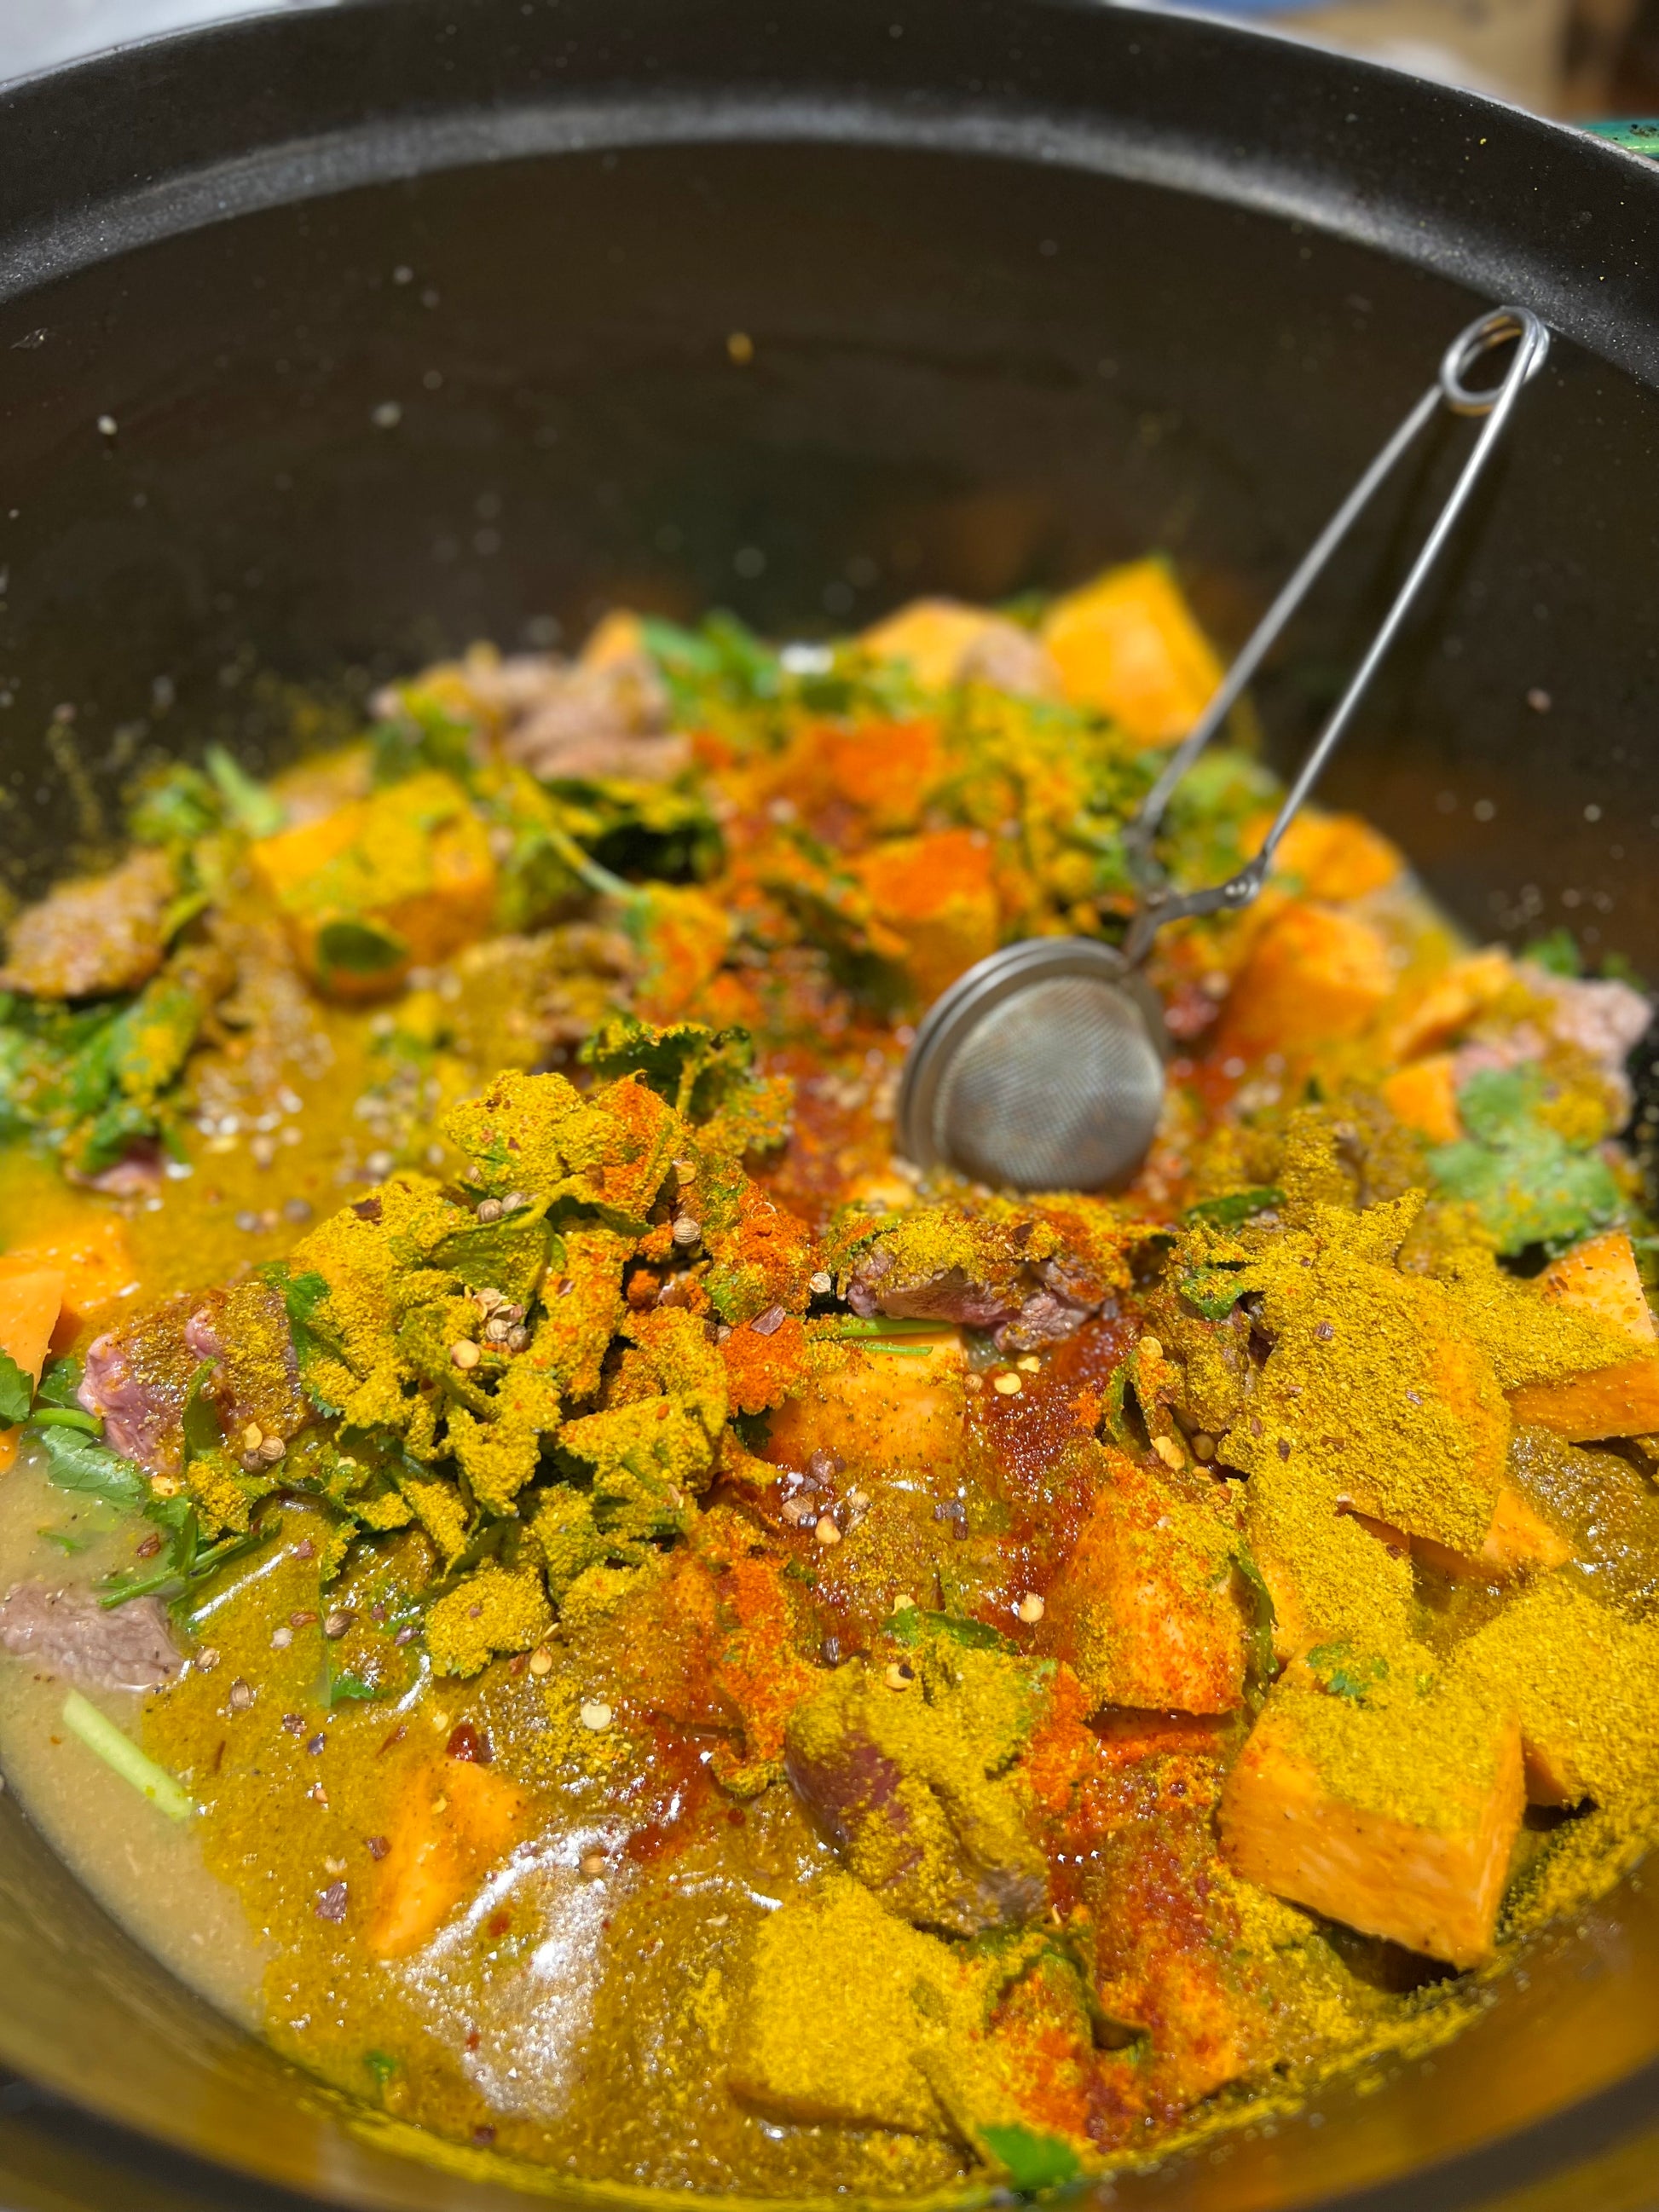 a curry from our pasture raised lamb, sweet potatoes, peas & beef bone broth